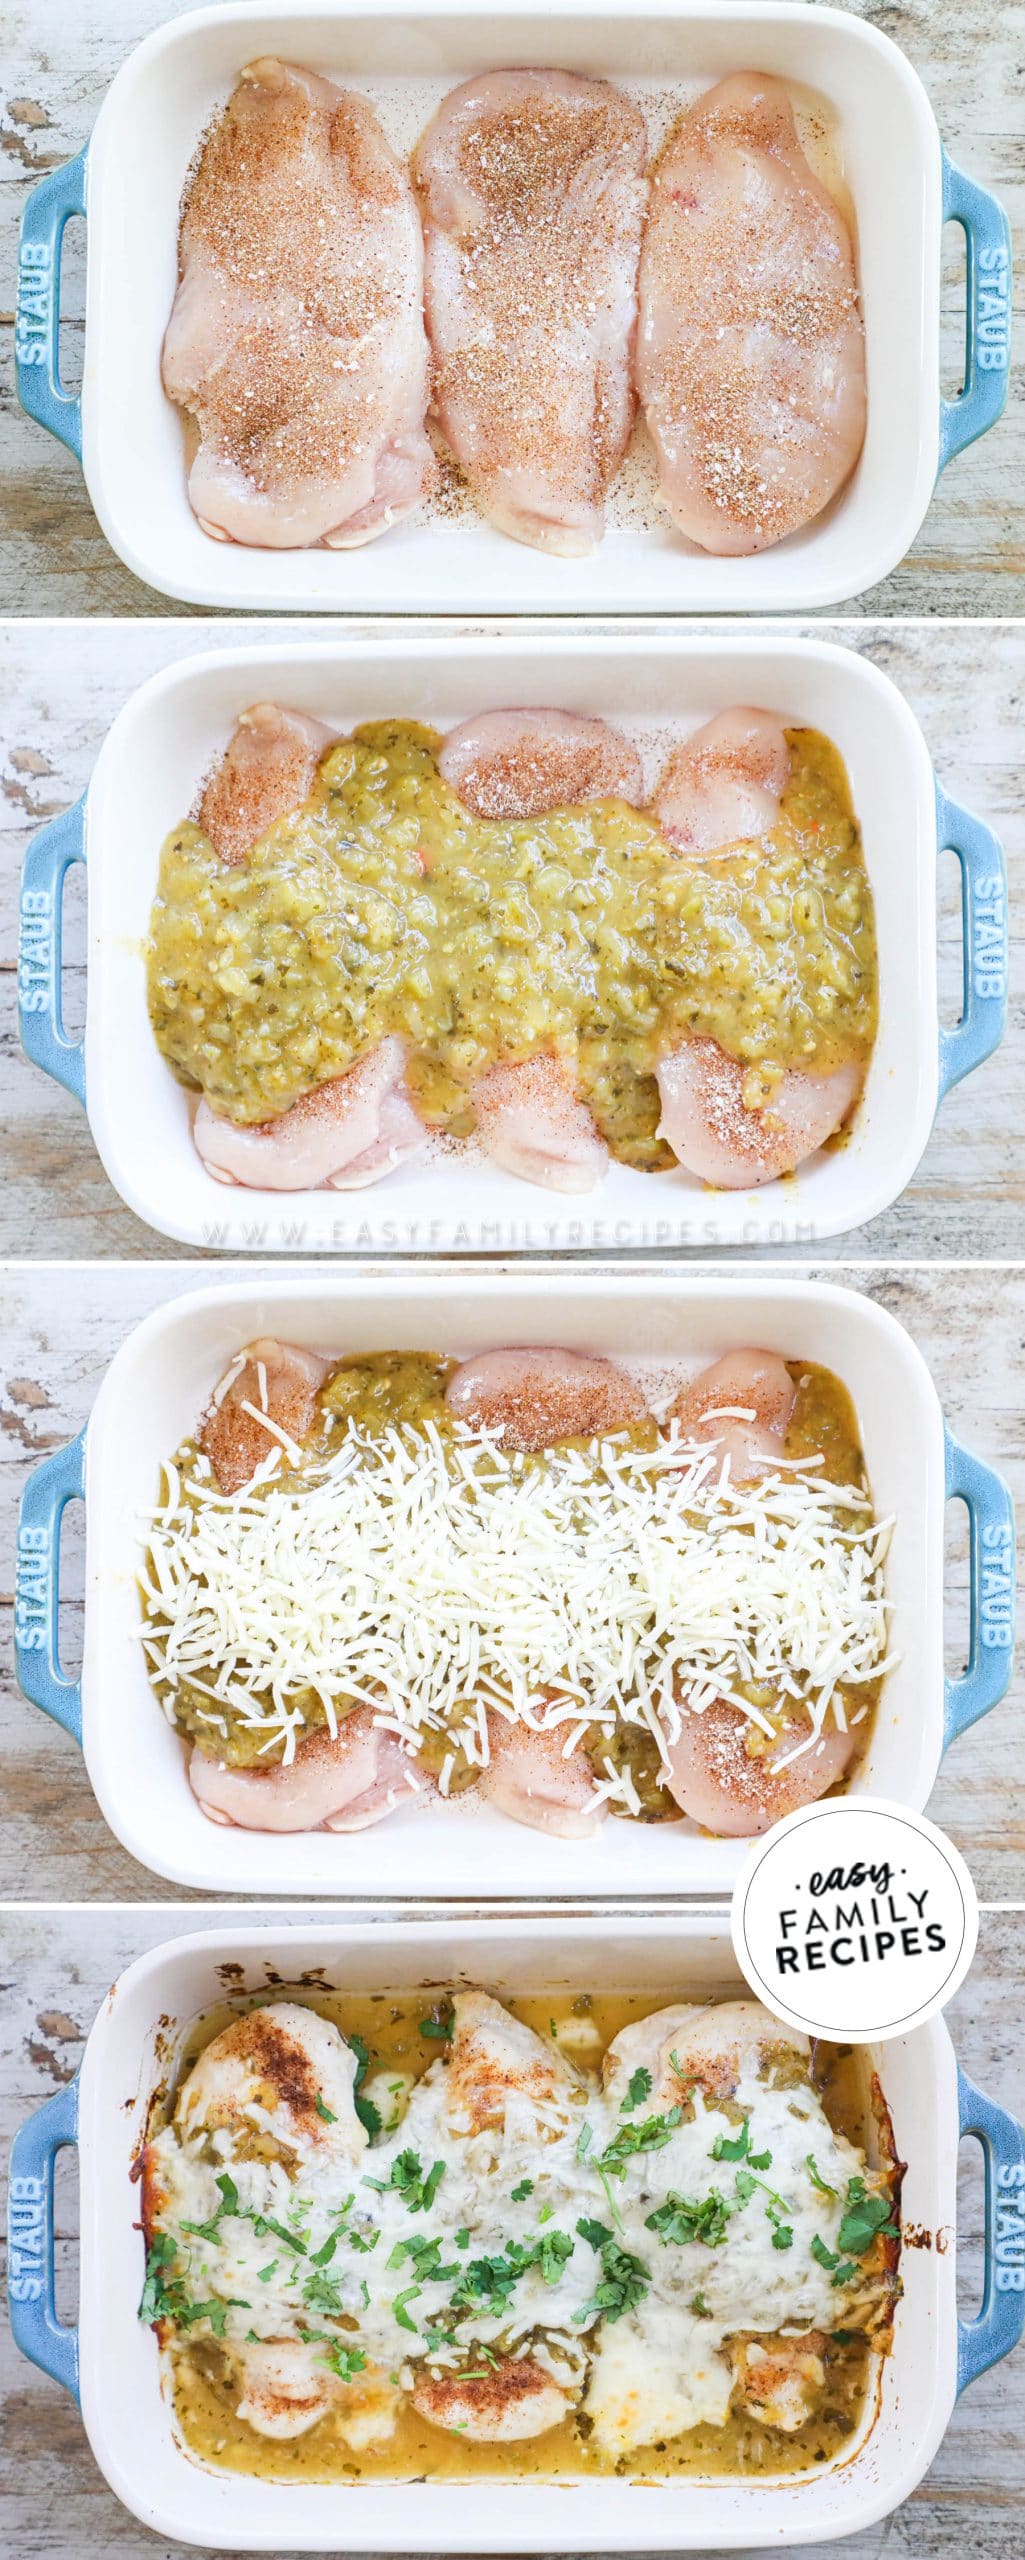 How to Cook Salsa Verde Chicken 1)line casserole dish with seasoned chicken breasts 2)Add salsa verde 3)Top with shredded cheese 4)Bake until done and cheese is melted